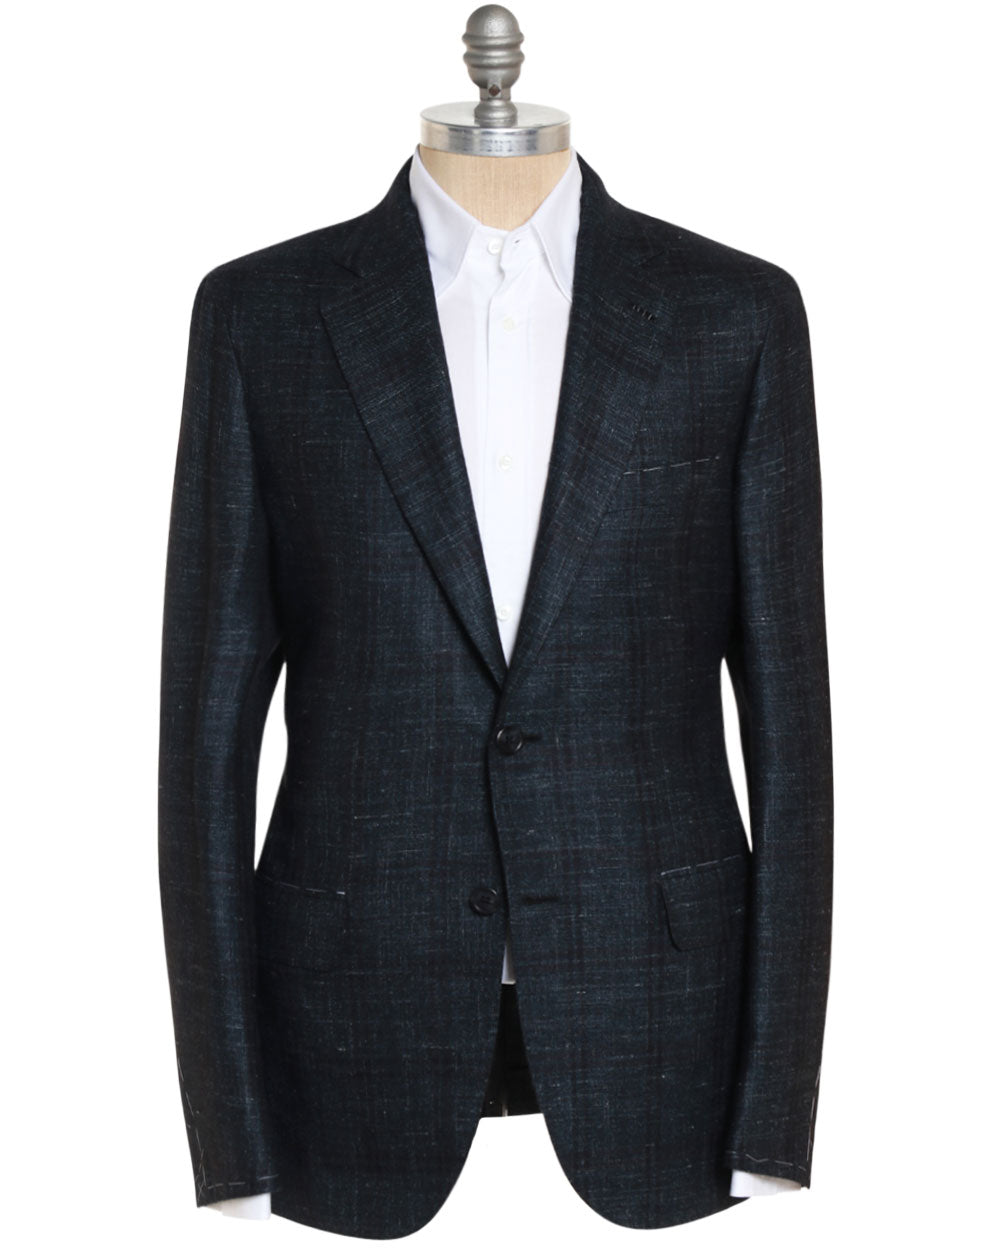 Dark Green and Black Cashmere Blend Plaid Plume Sportcoat